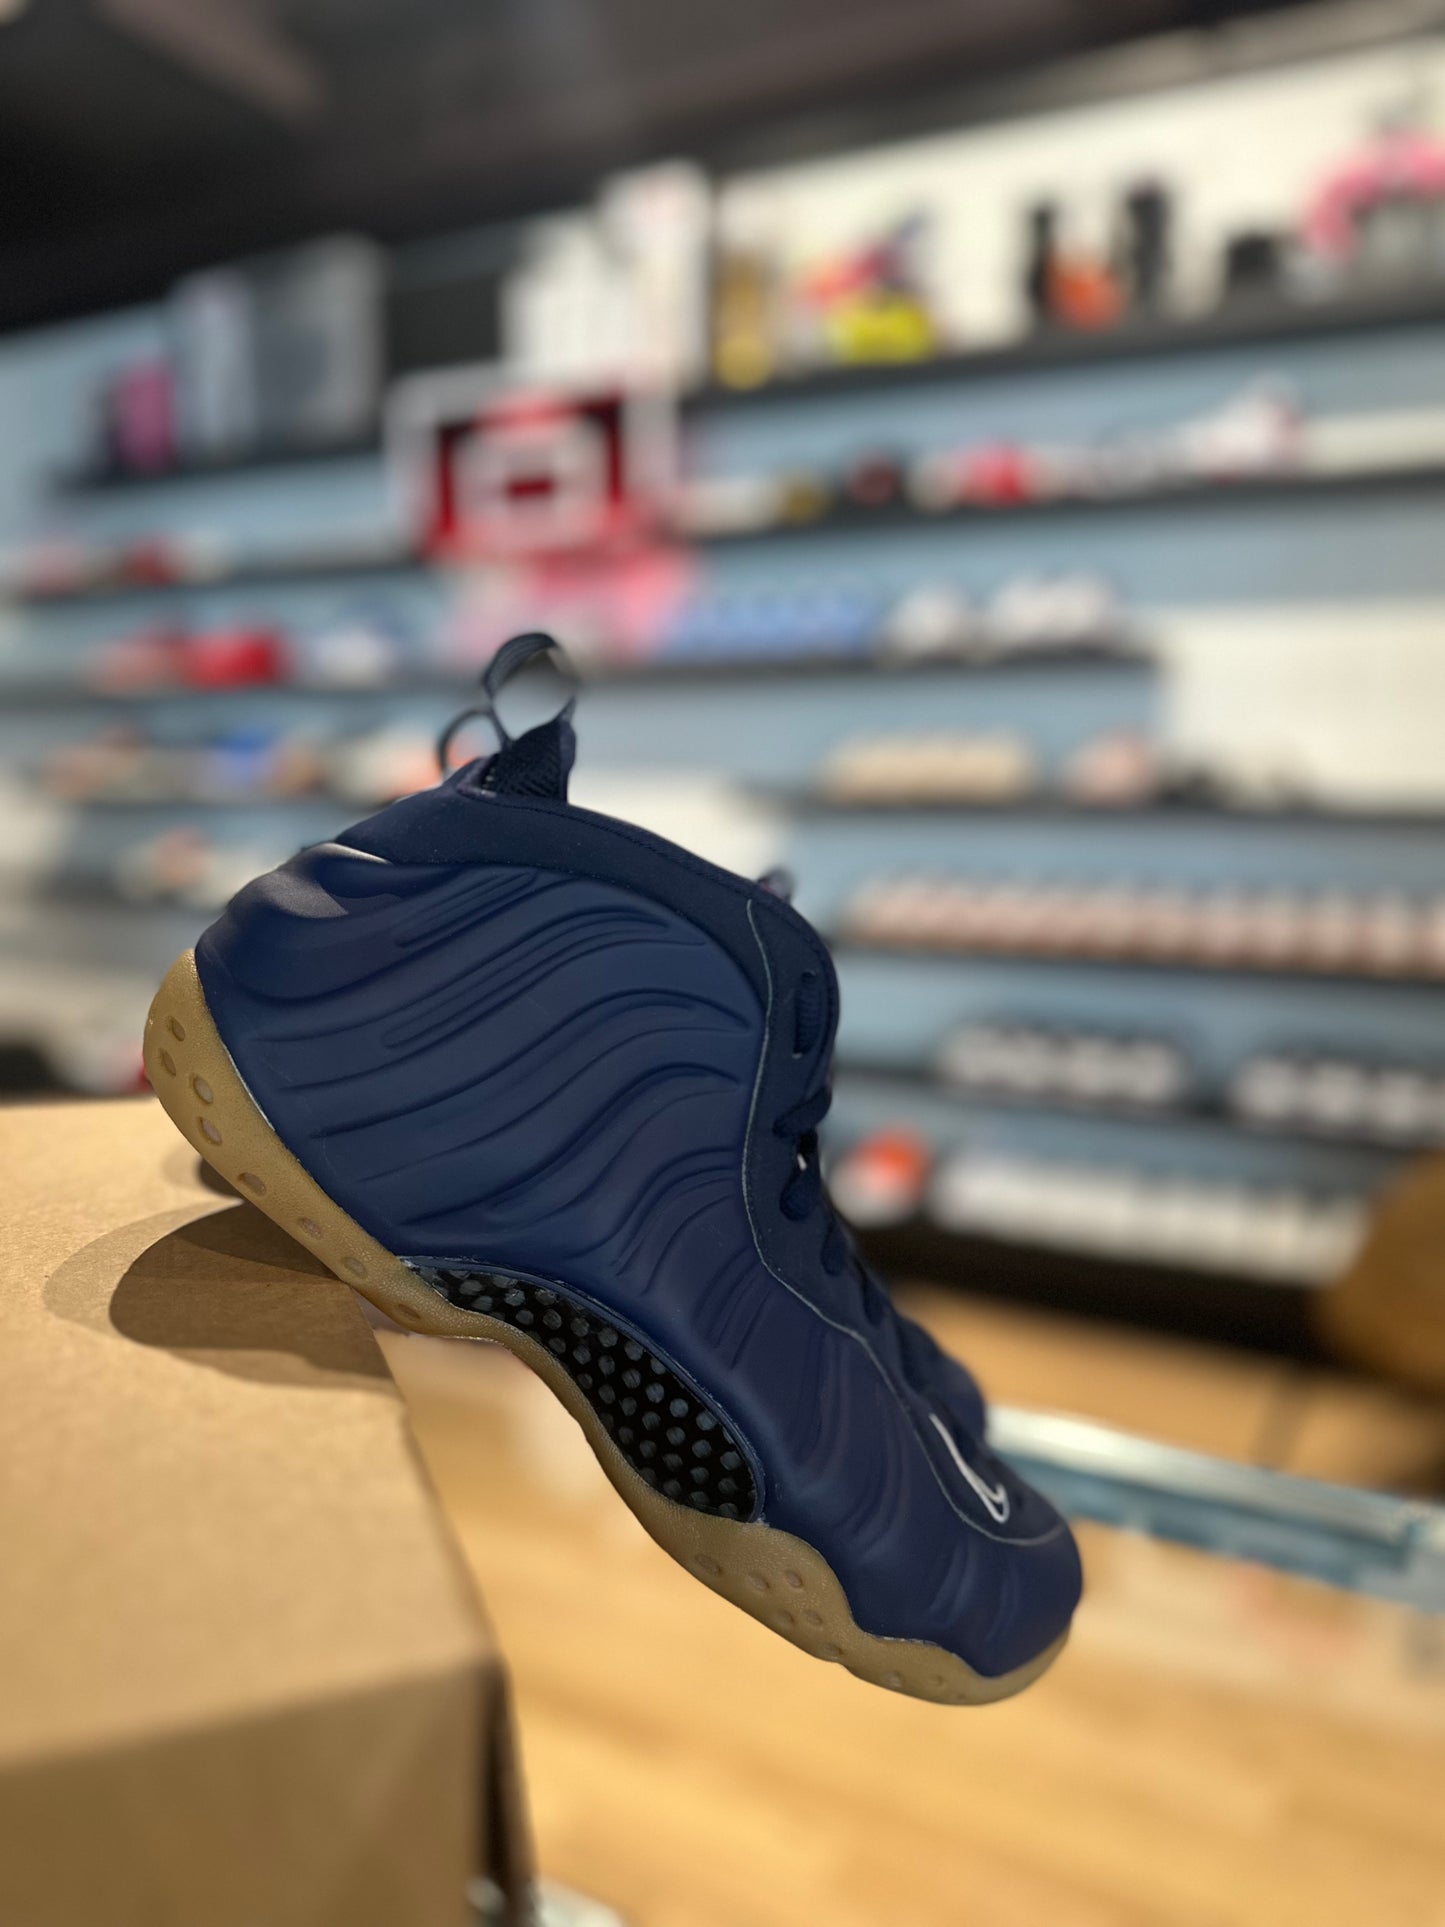 Nike Air Foamposite One “Navy/Gum” Size 8 VNDS RB